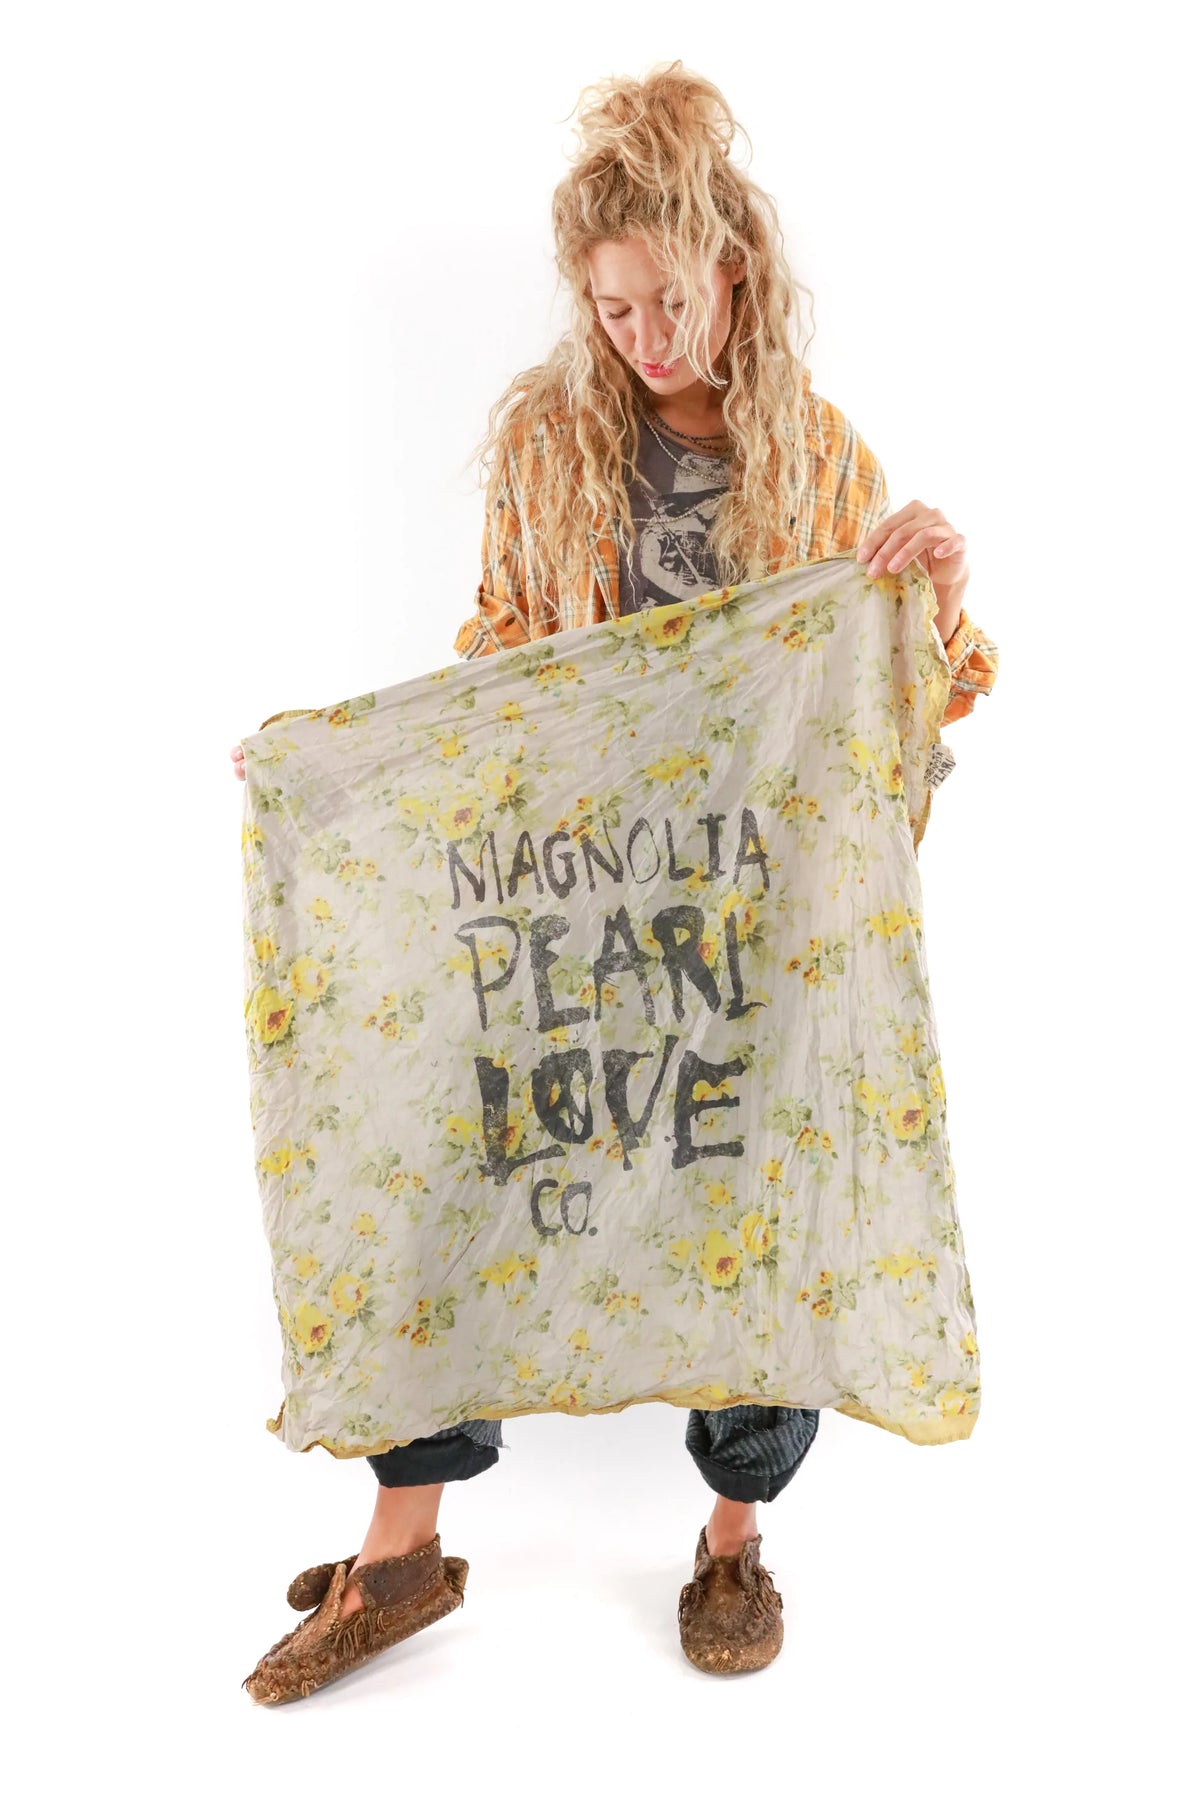 MP LOVE CO FLORAL SCARF 126